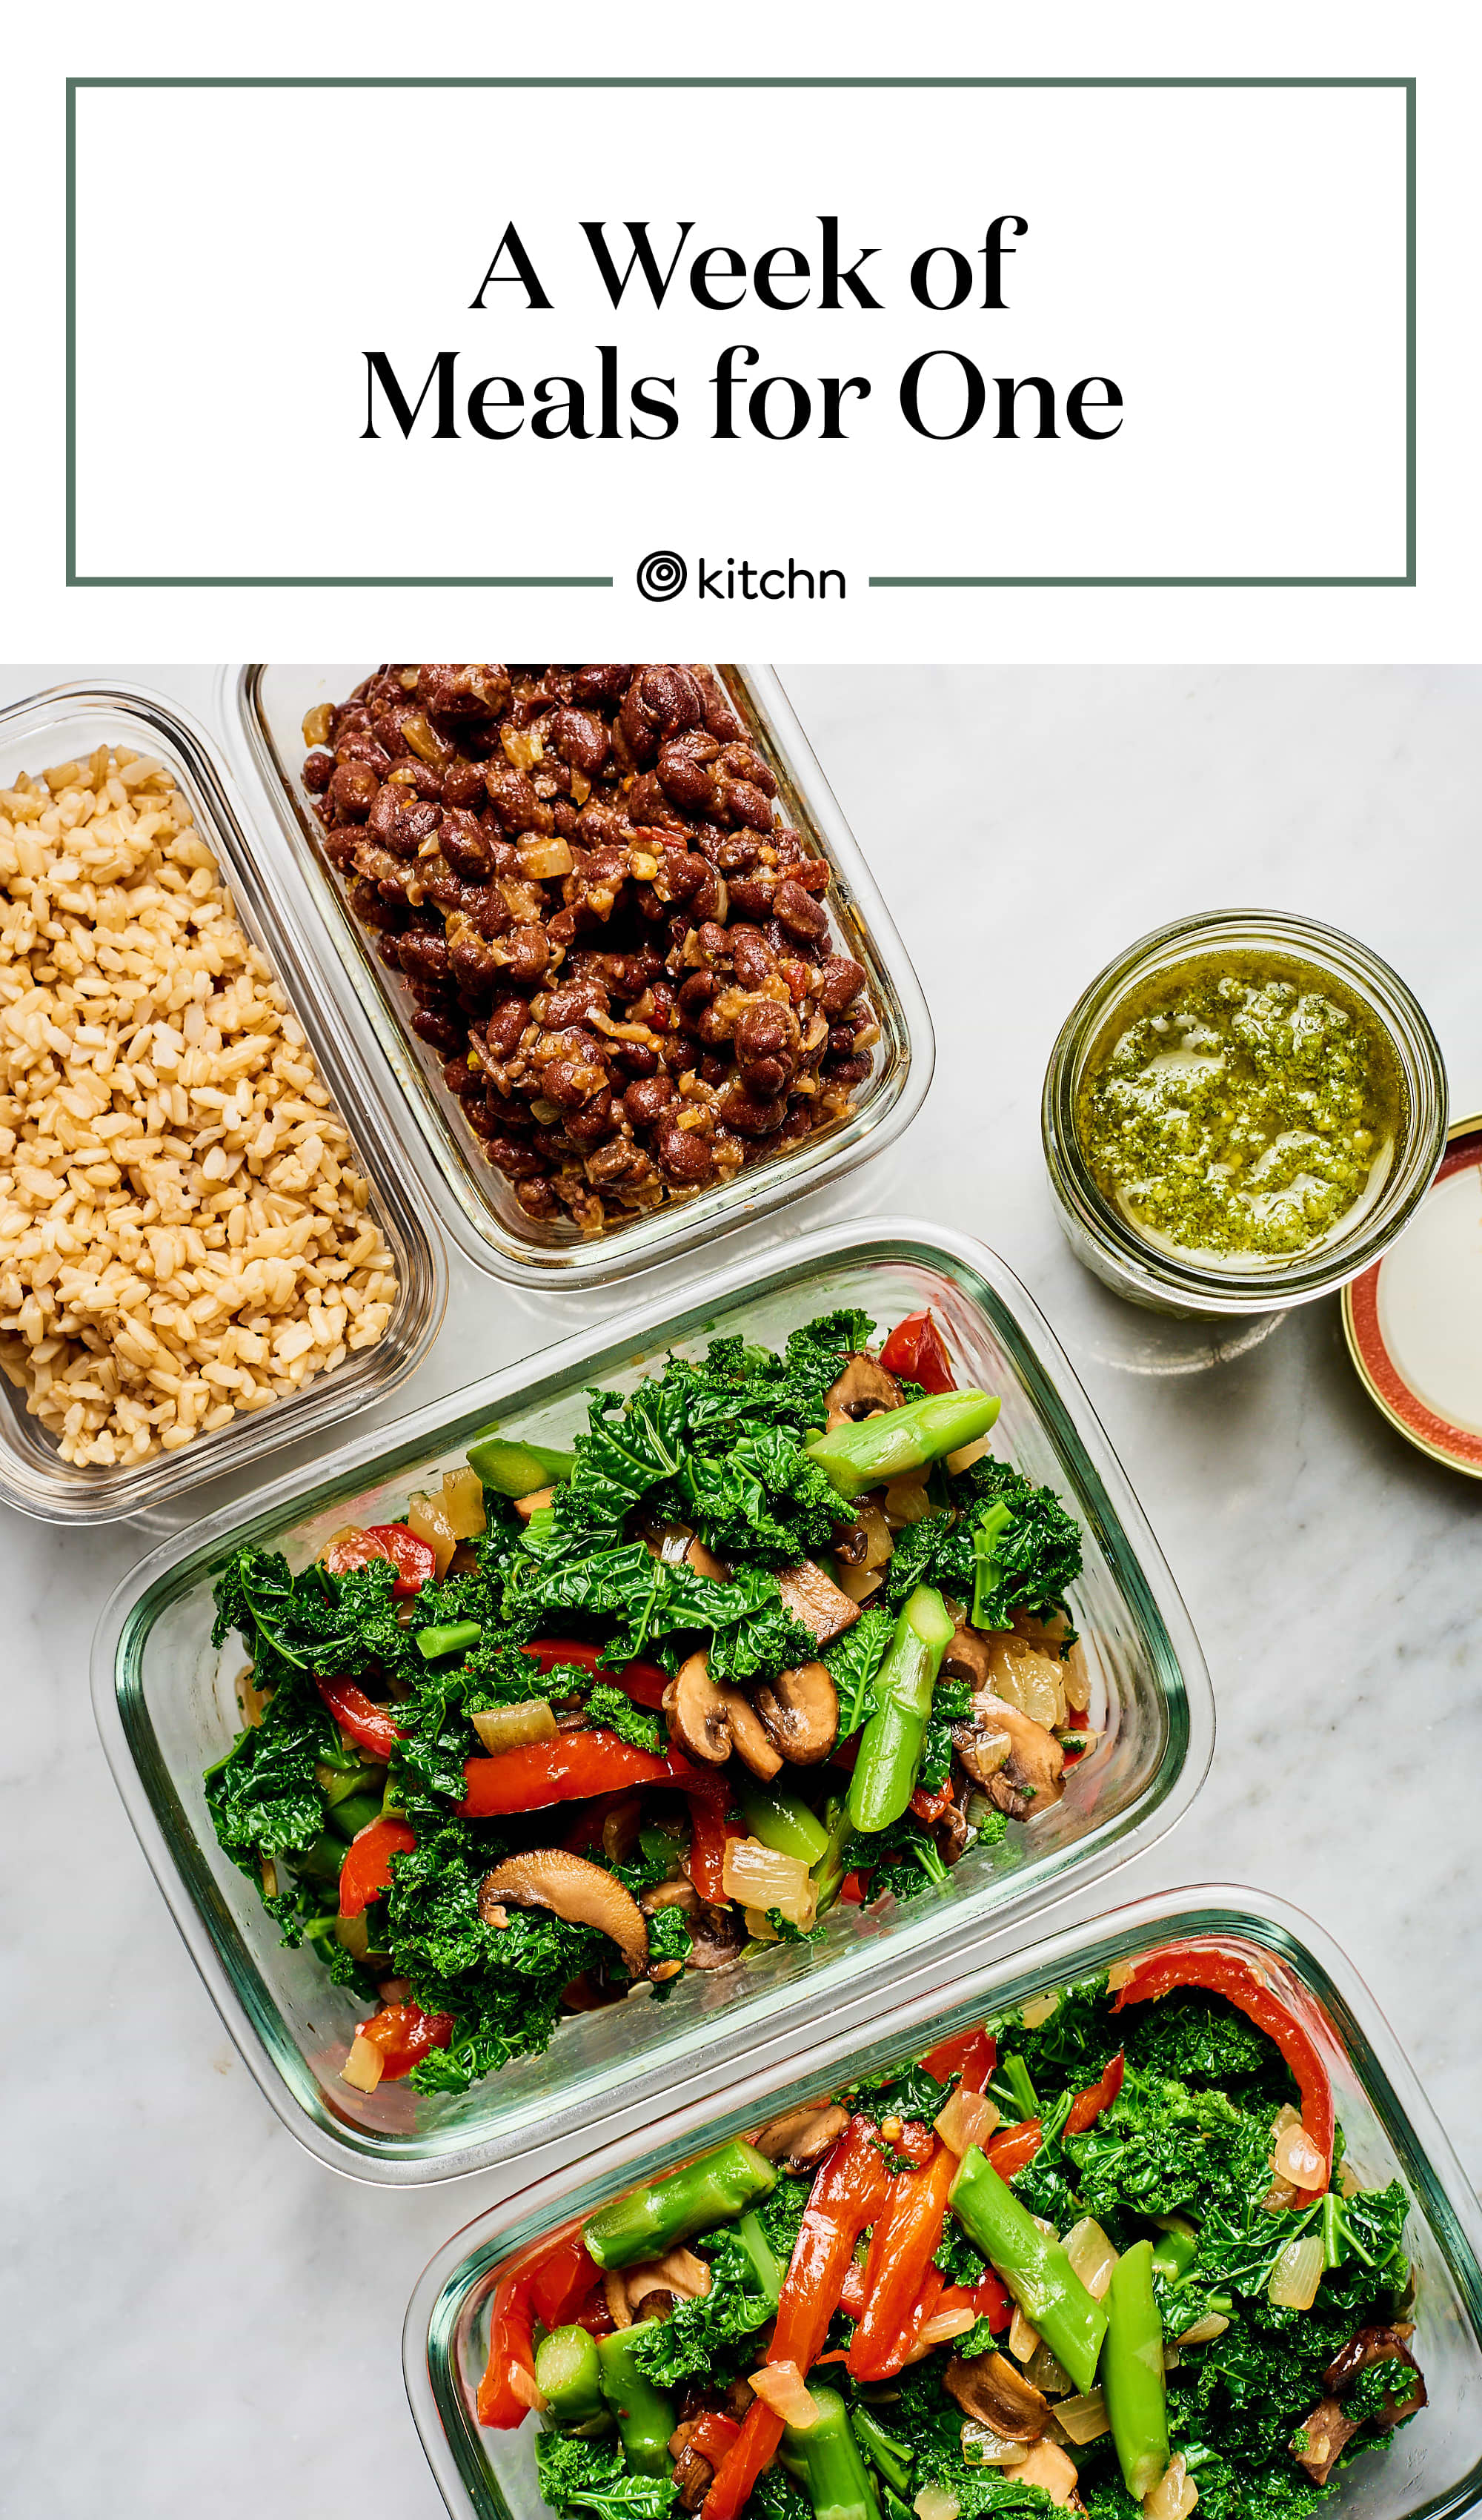 Meal Prep Plan: How I Prep a Week of Meals for One in Just Over an Hour